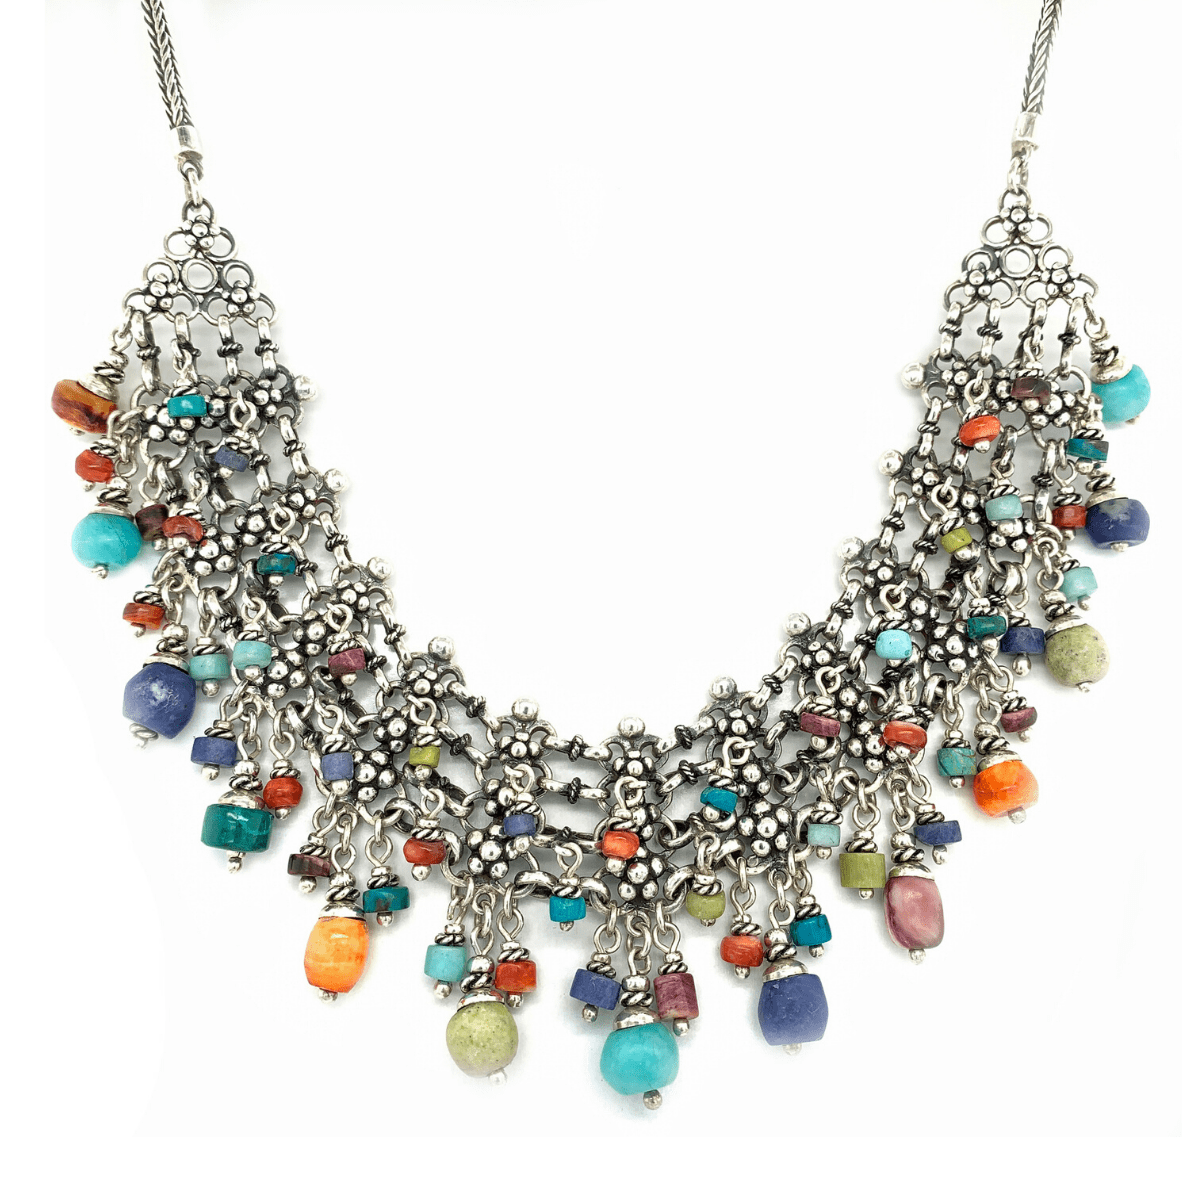 Multi-Colored Beads Cascade & Burnished Sterling Silver Necklace - Qinti - The Peruvian Shop